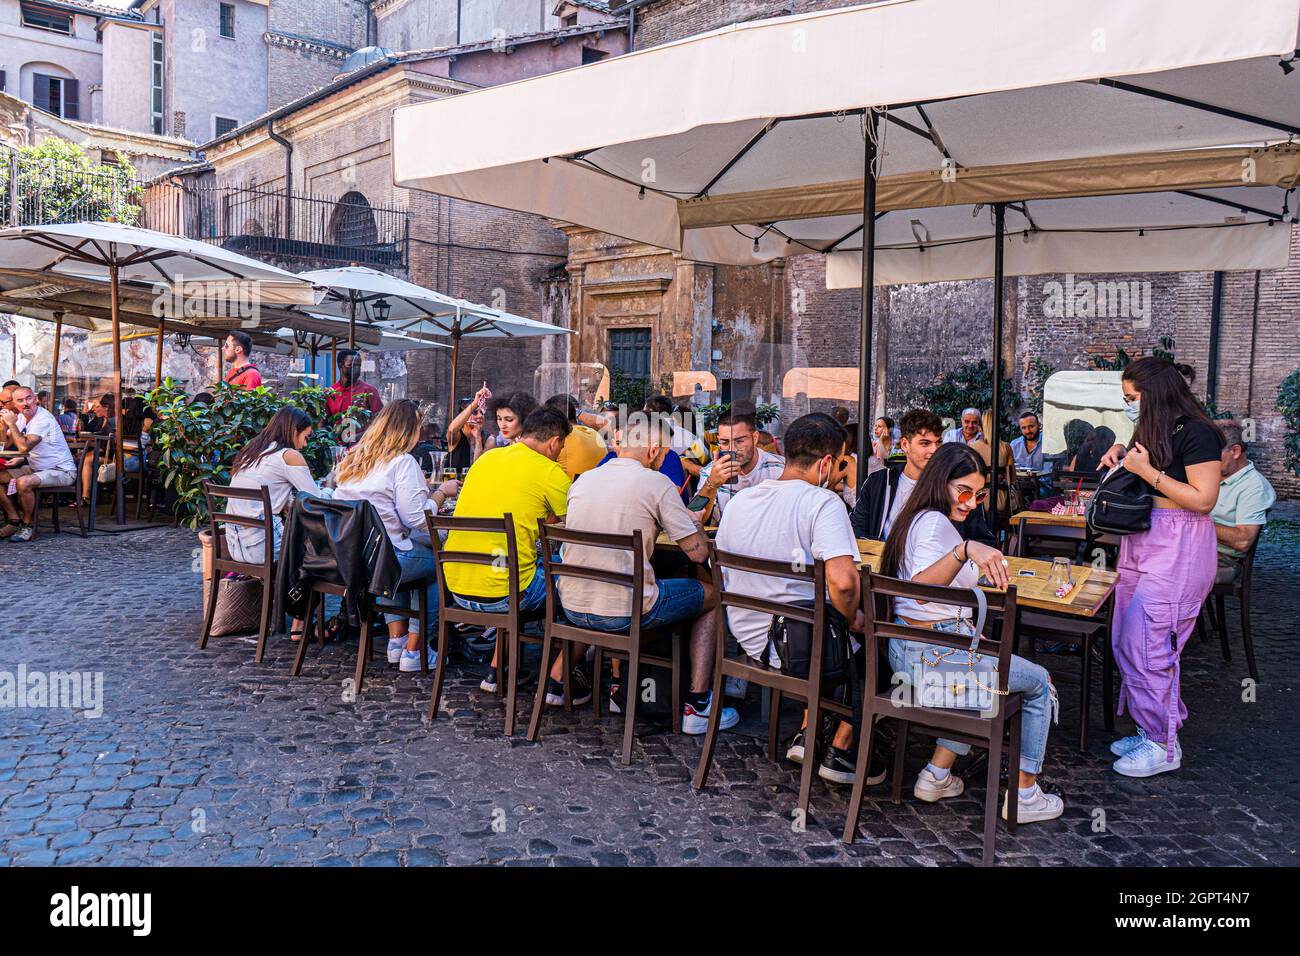 ROME ITALY, UK. 30 September, 2021. People  dining alfresco in the Rome dstrict of Trastevere at lunchtime on a warm and humid day. Since the Italian government started to relax the rules on lockdown more people are seen eating in restaurants indoors and outdoors. Diners sitting indoors are required to show a Green Pass which certifies the holder is doubled vaccinated and covid free. Credit: amer ghazzal/Alamy Live News Stock Photo